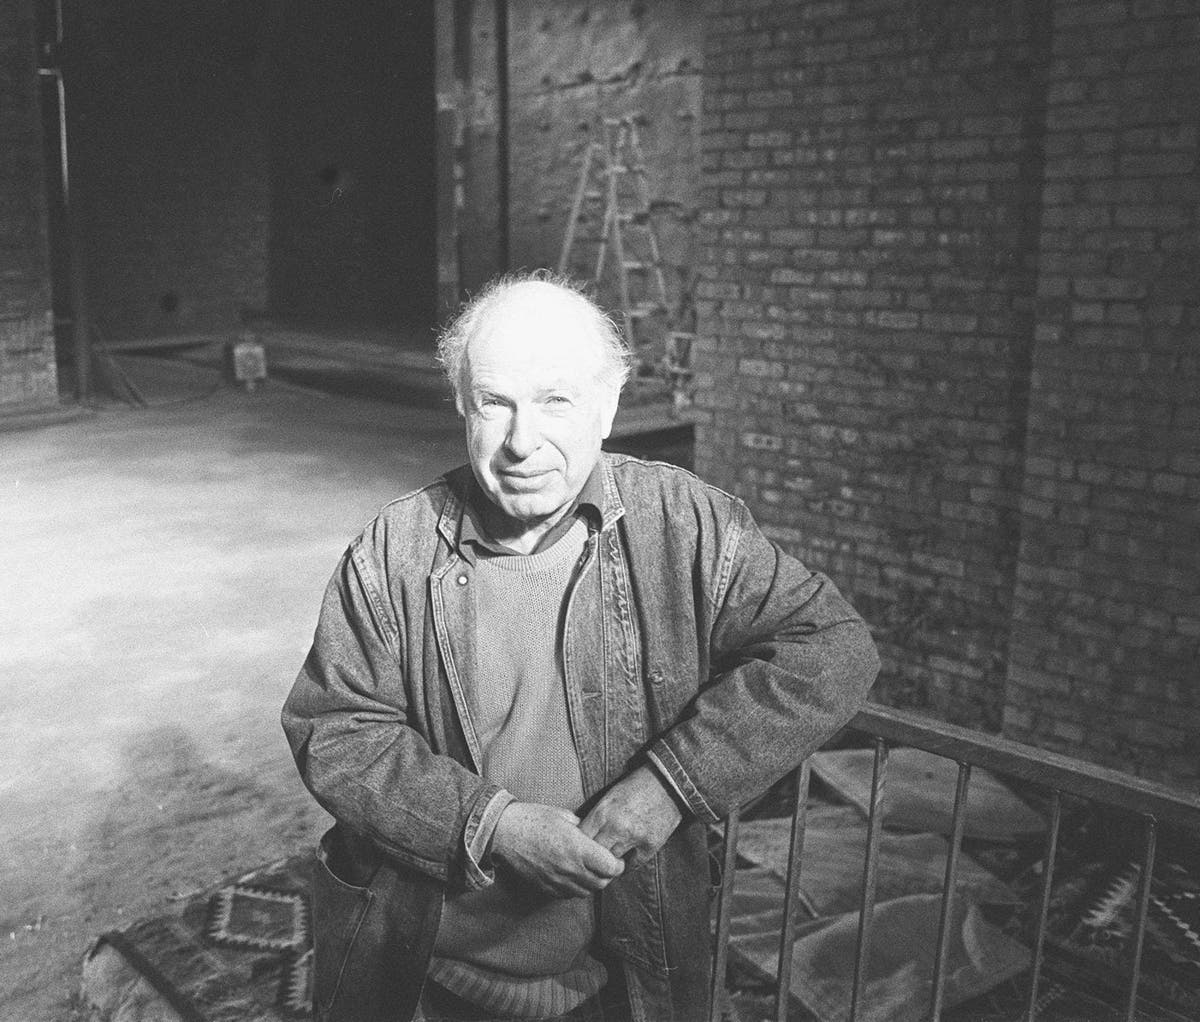 West End to dim lights in honour of ‘visionary director’ Peter Brook